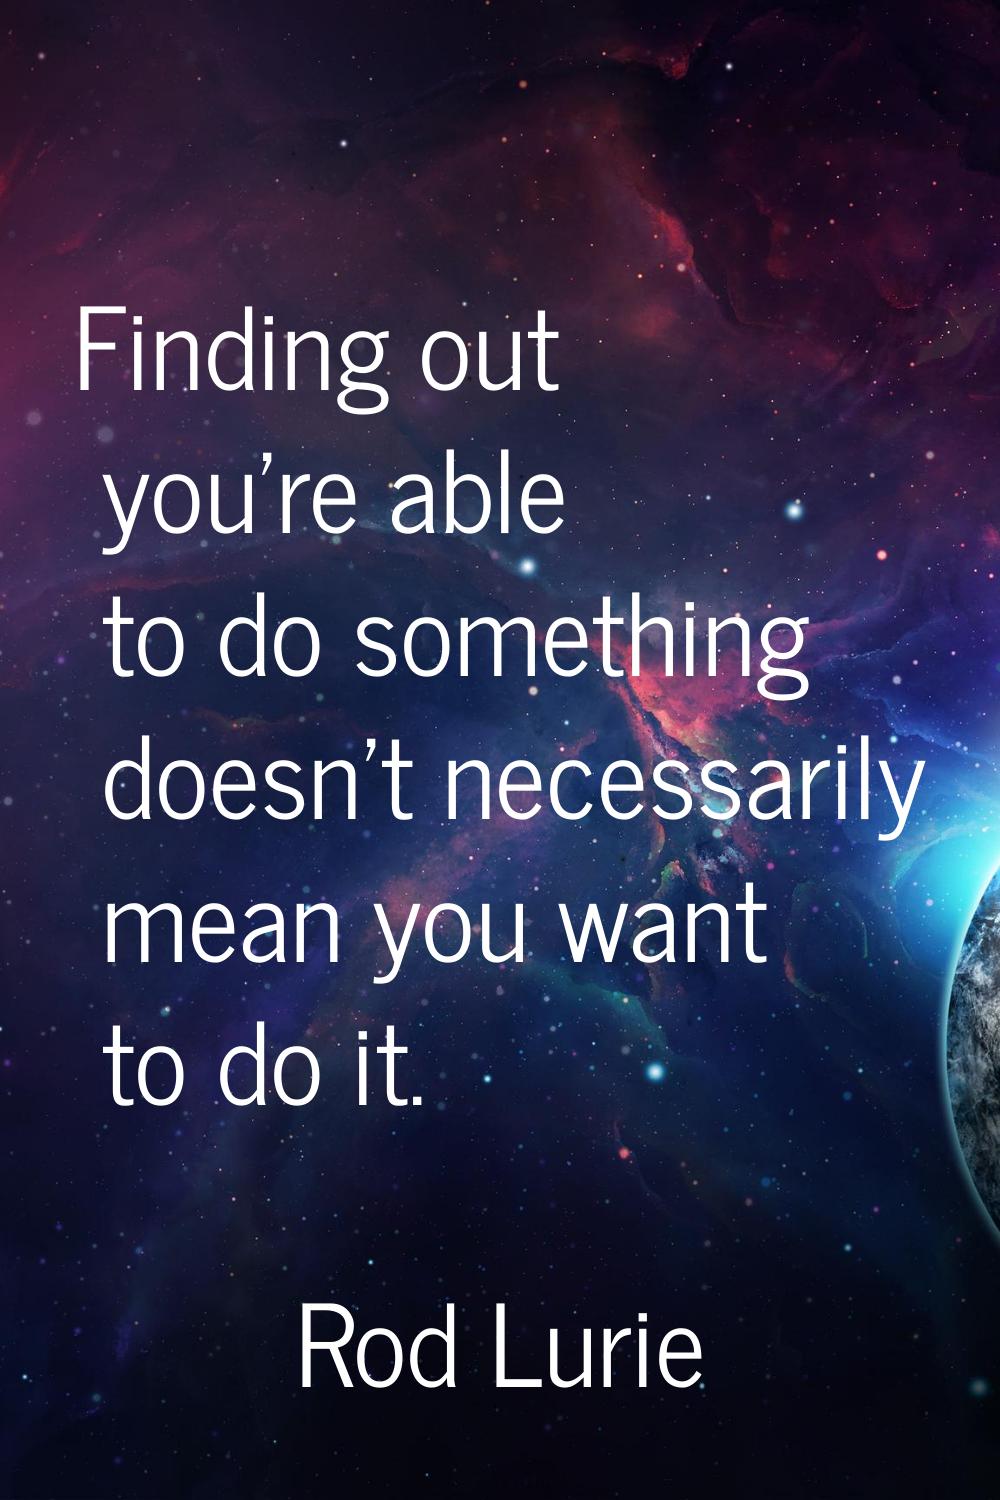 Finding out you're able to do something doesn't necessarily mean you want to do it.